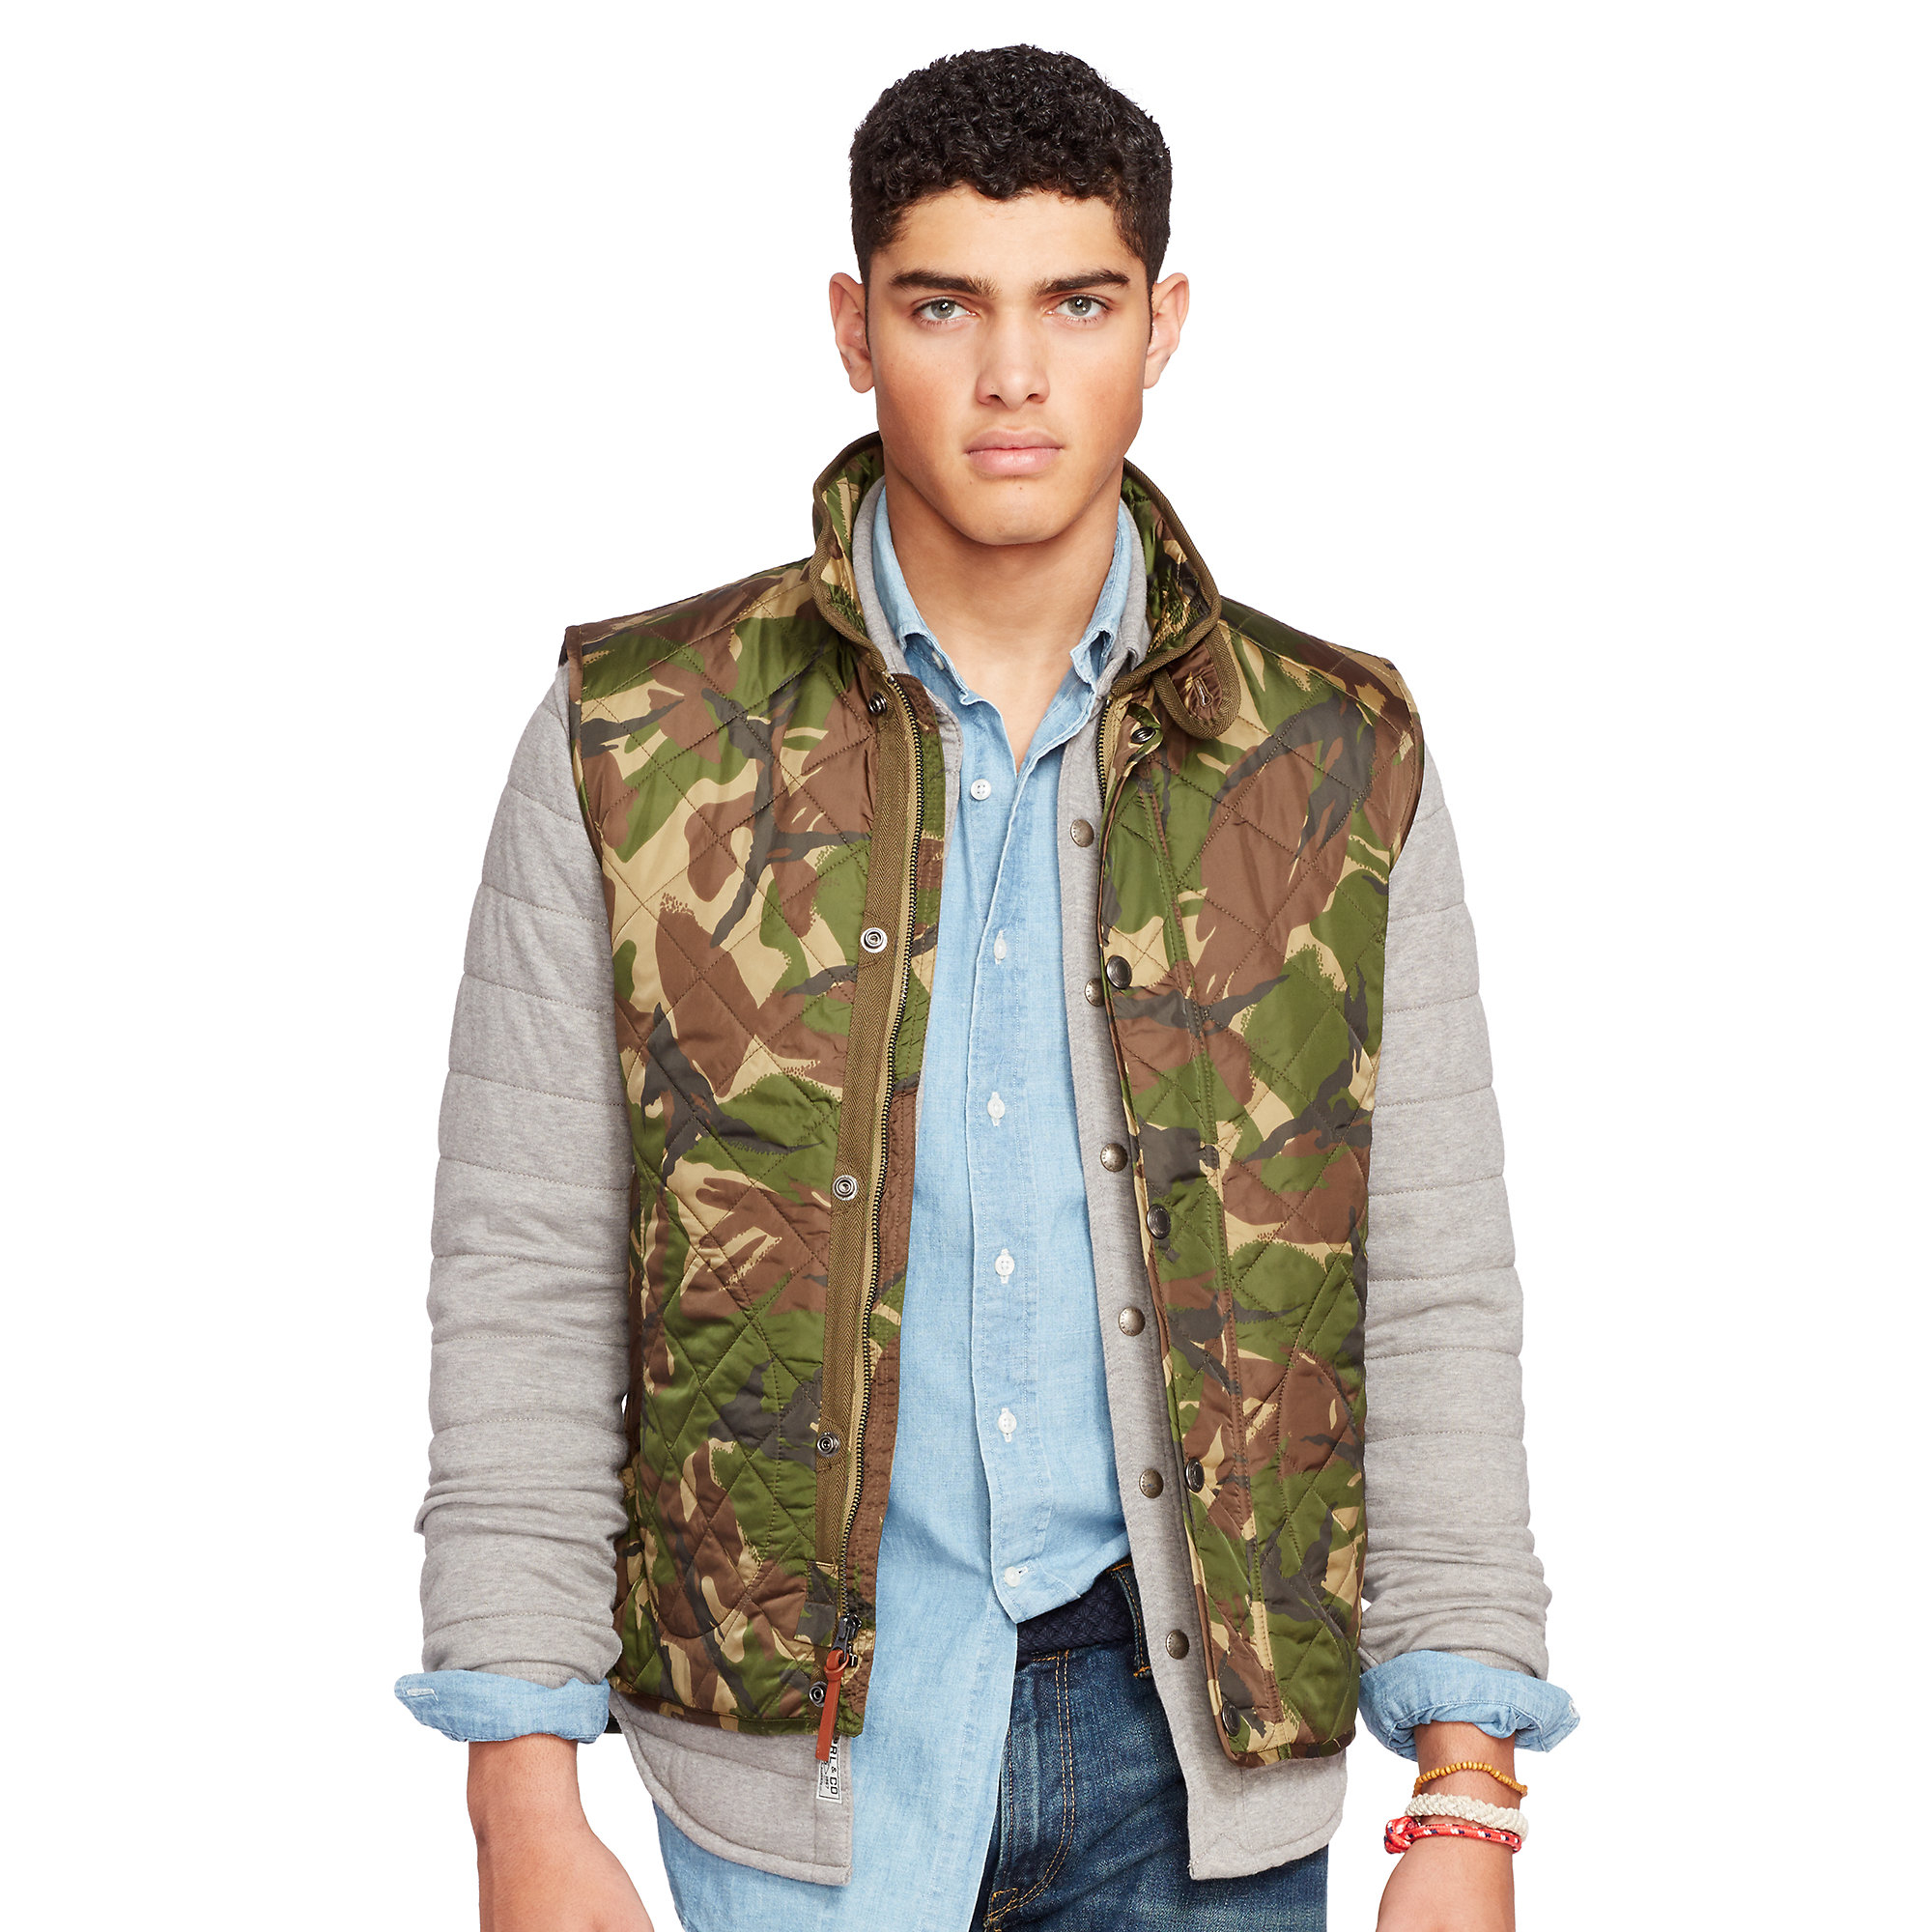 Polo Ralph Lauren Cotton Camo Diamond-quilted Vest in Gray for Men - Lyst